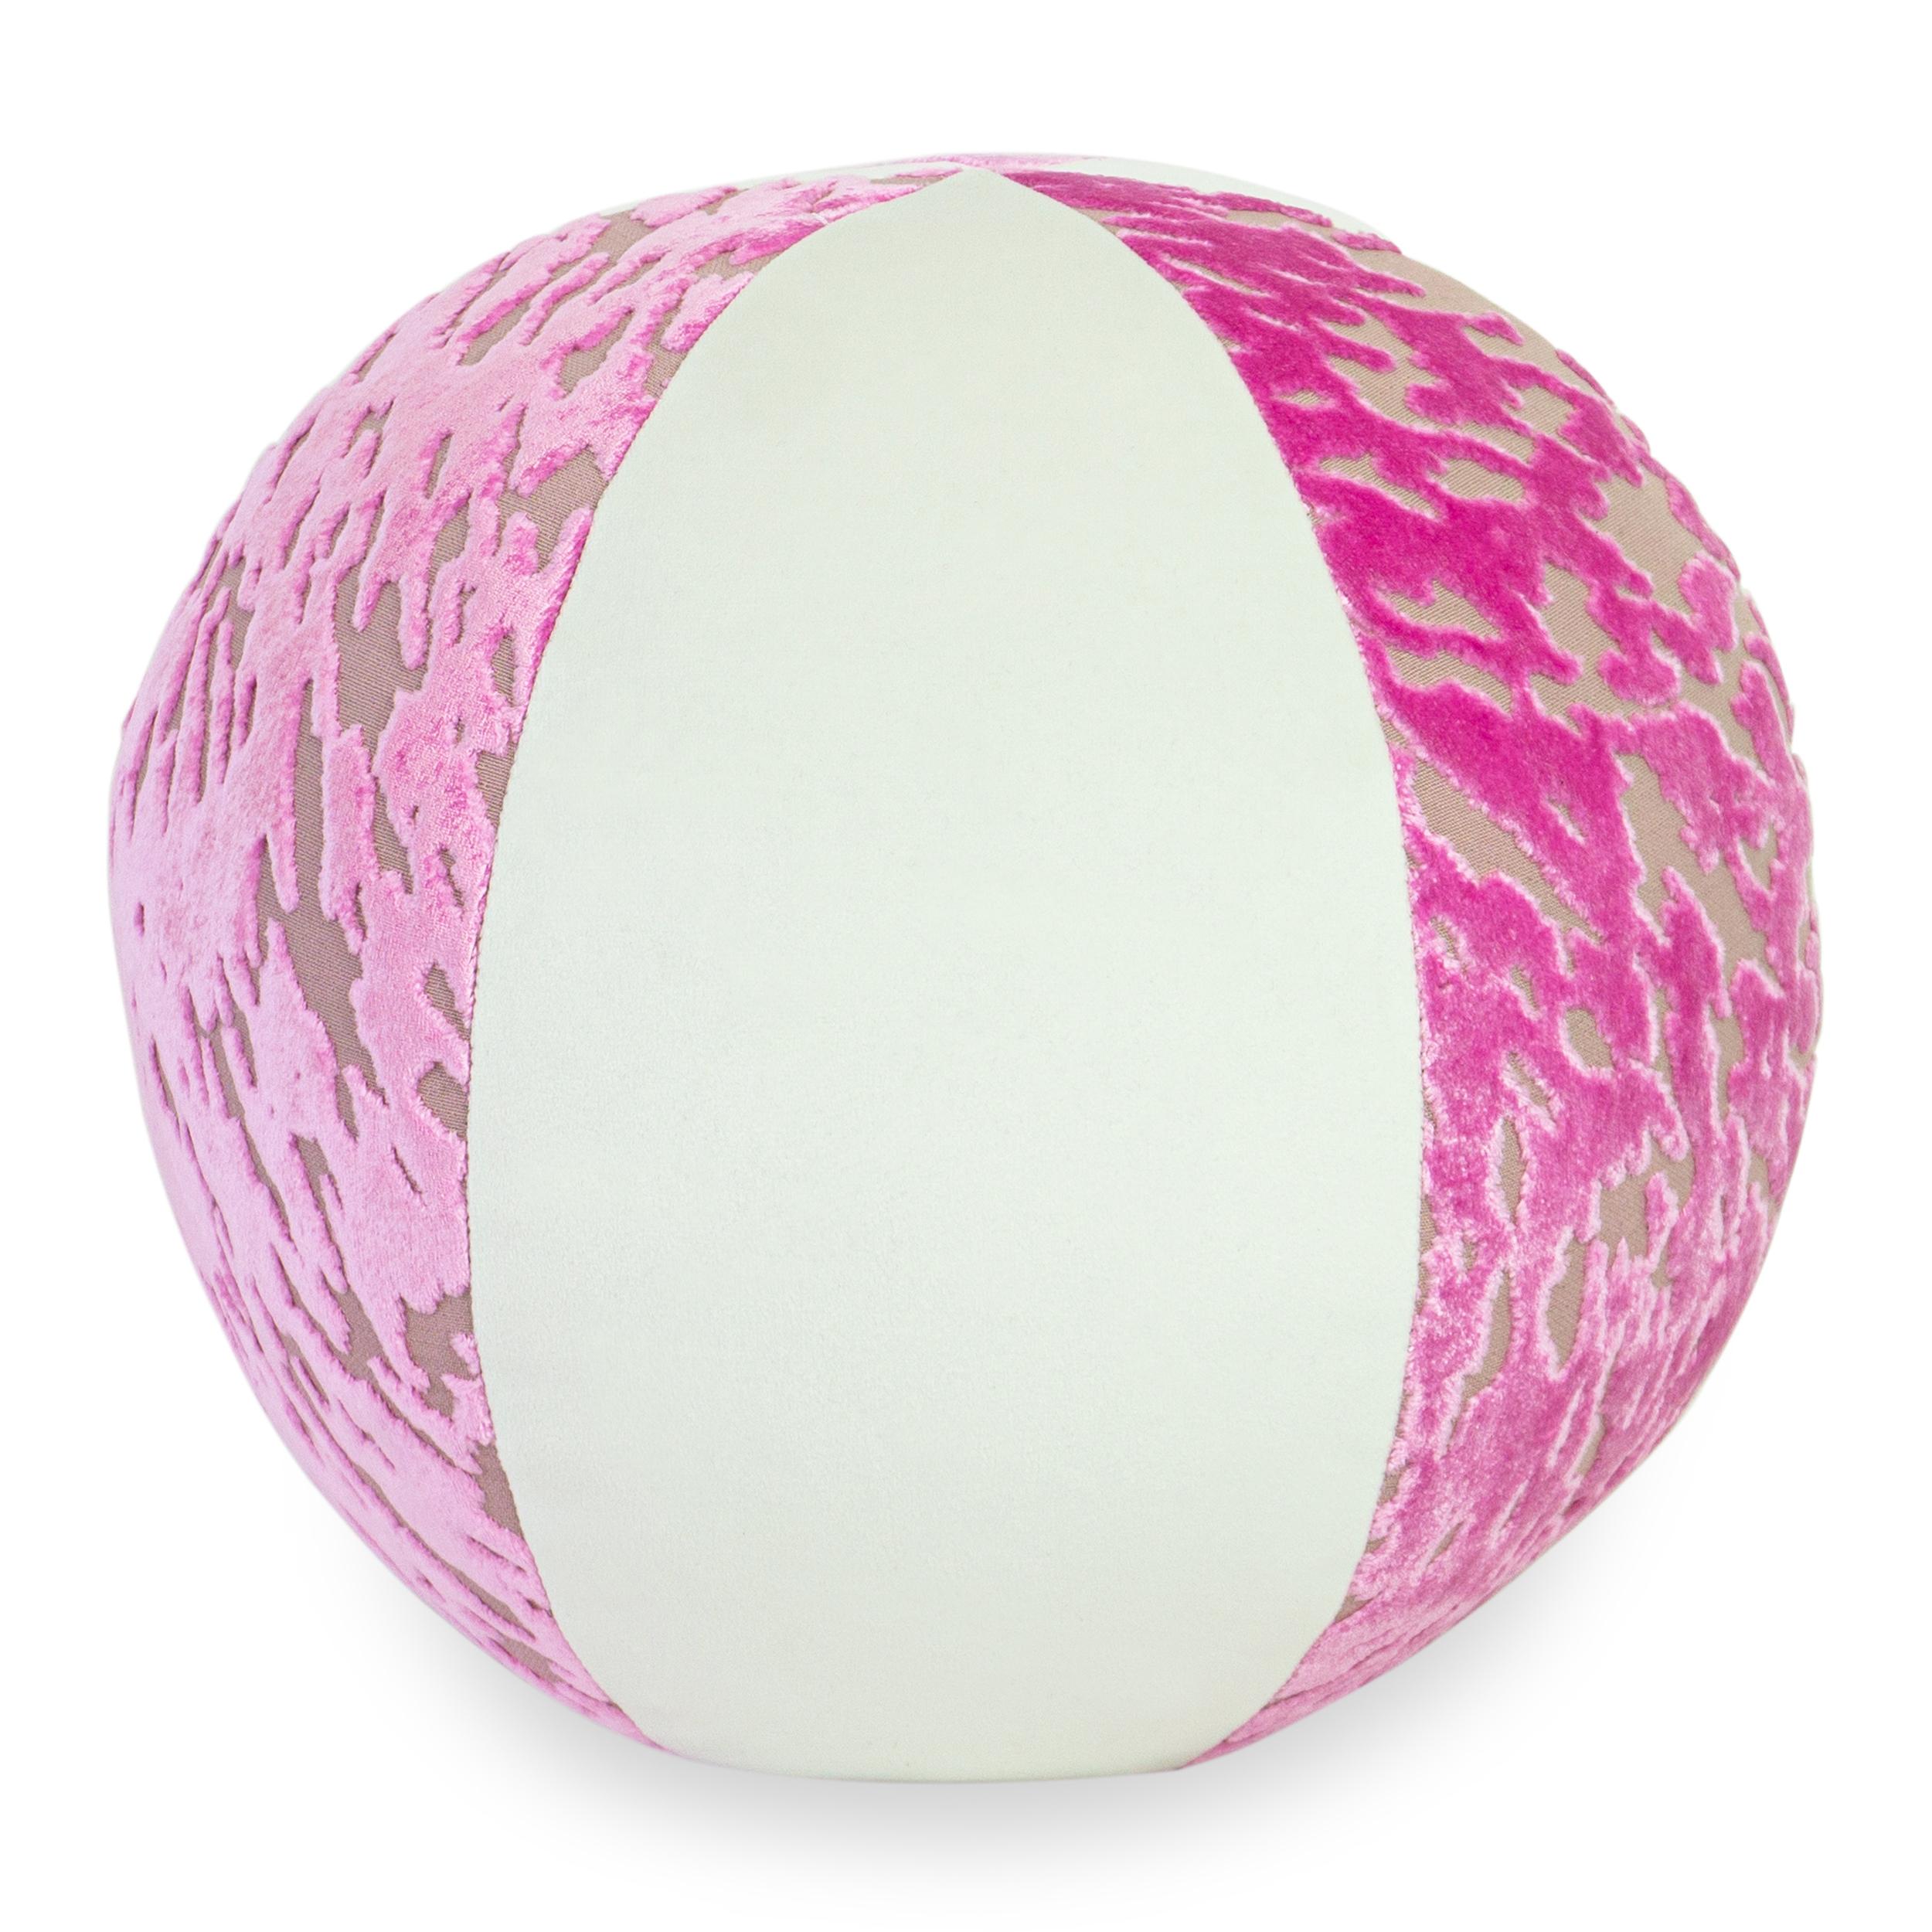 Ball pillow with beach ball design. Pink cut velvet with white solid velvet. Firm and with a bit of weight to it. Handmade in Norwalk CT.

Measurements:
Overall: 12” W x 12” H
Disclaimer: Due to their handcrafted nature, the final size and shape of